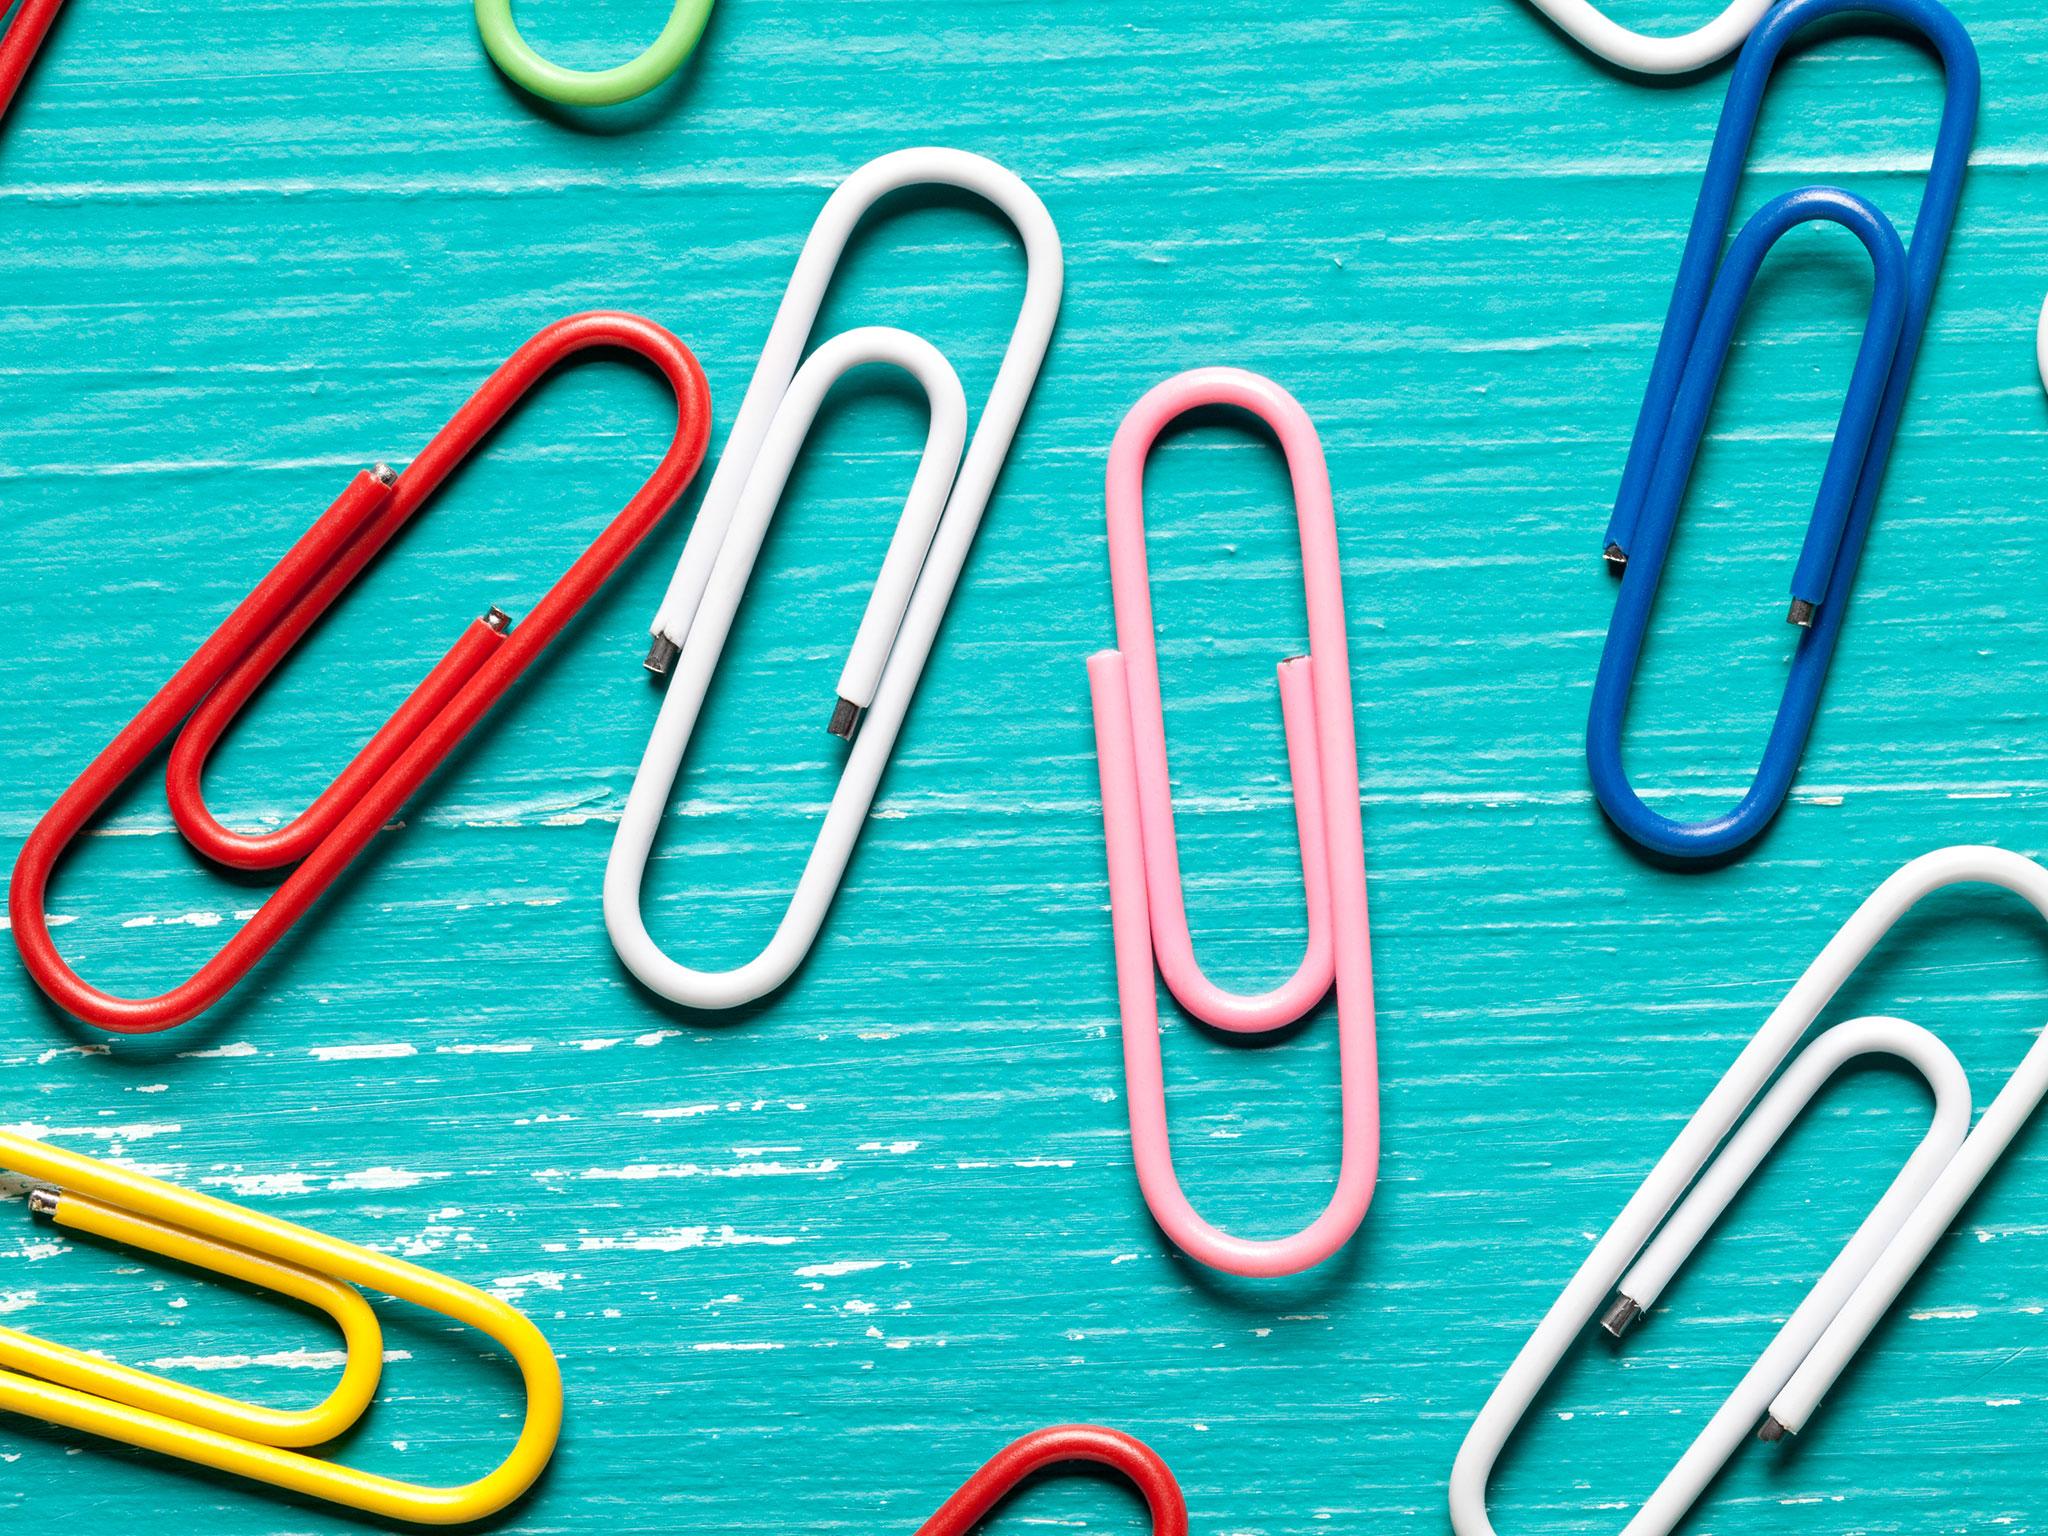 A psychologist believes paperclips could offer a window into a person's personality.